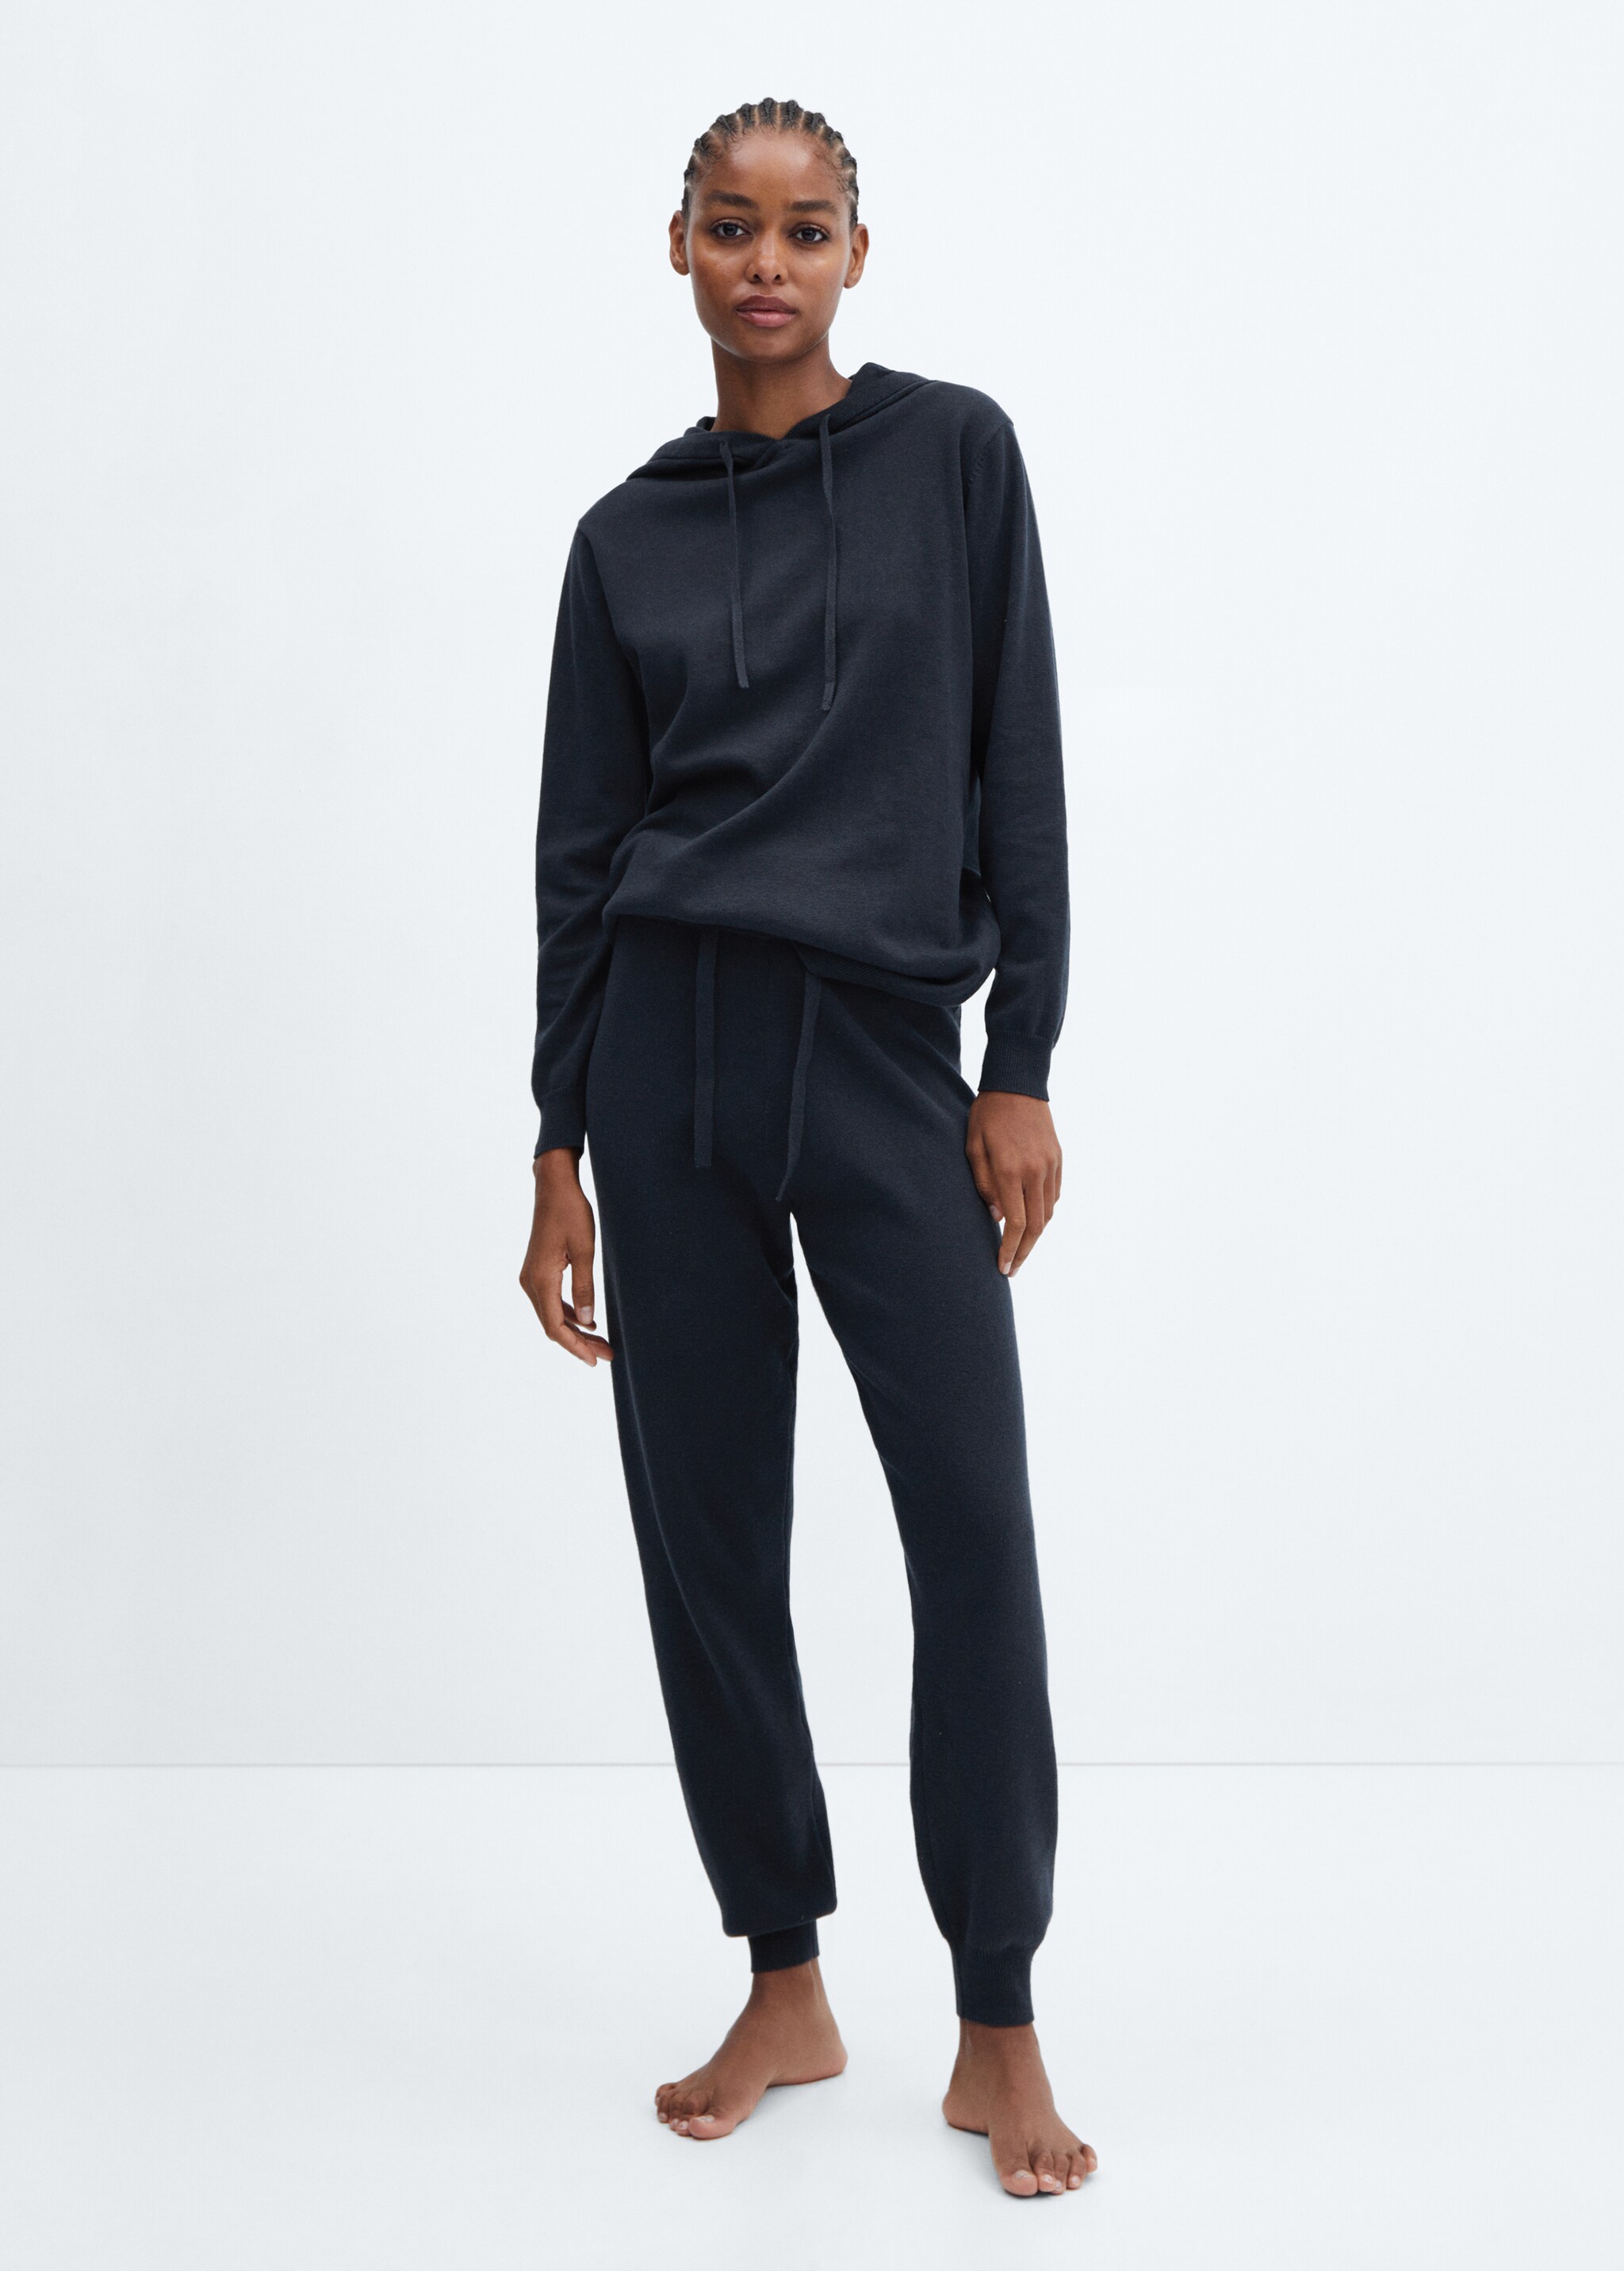 Cotton and linen jogger pyjama trousers - General plane